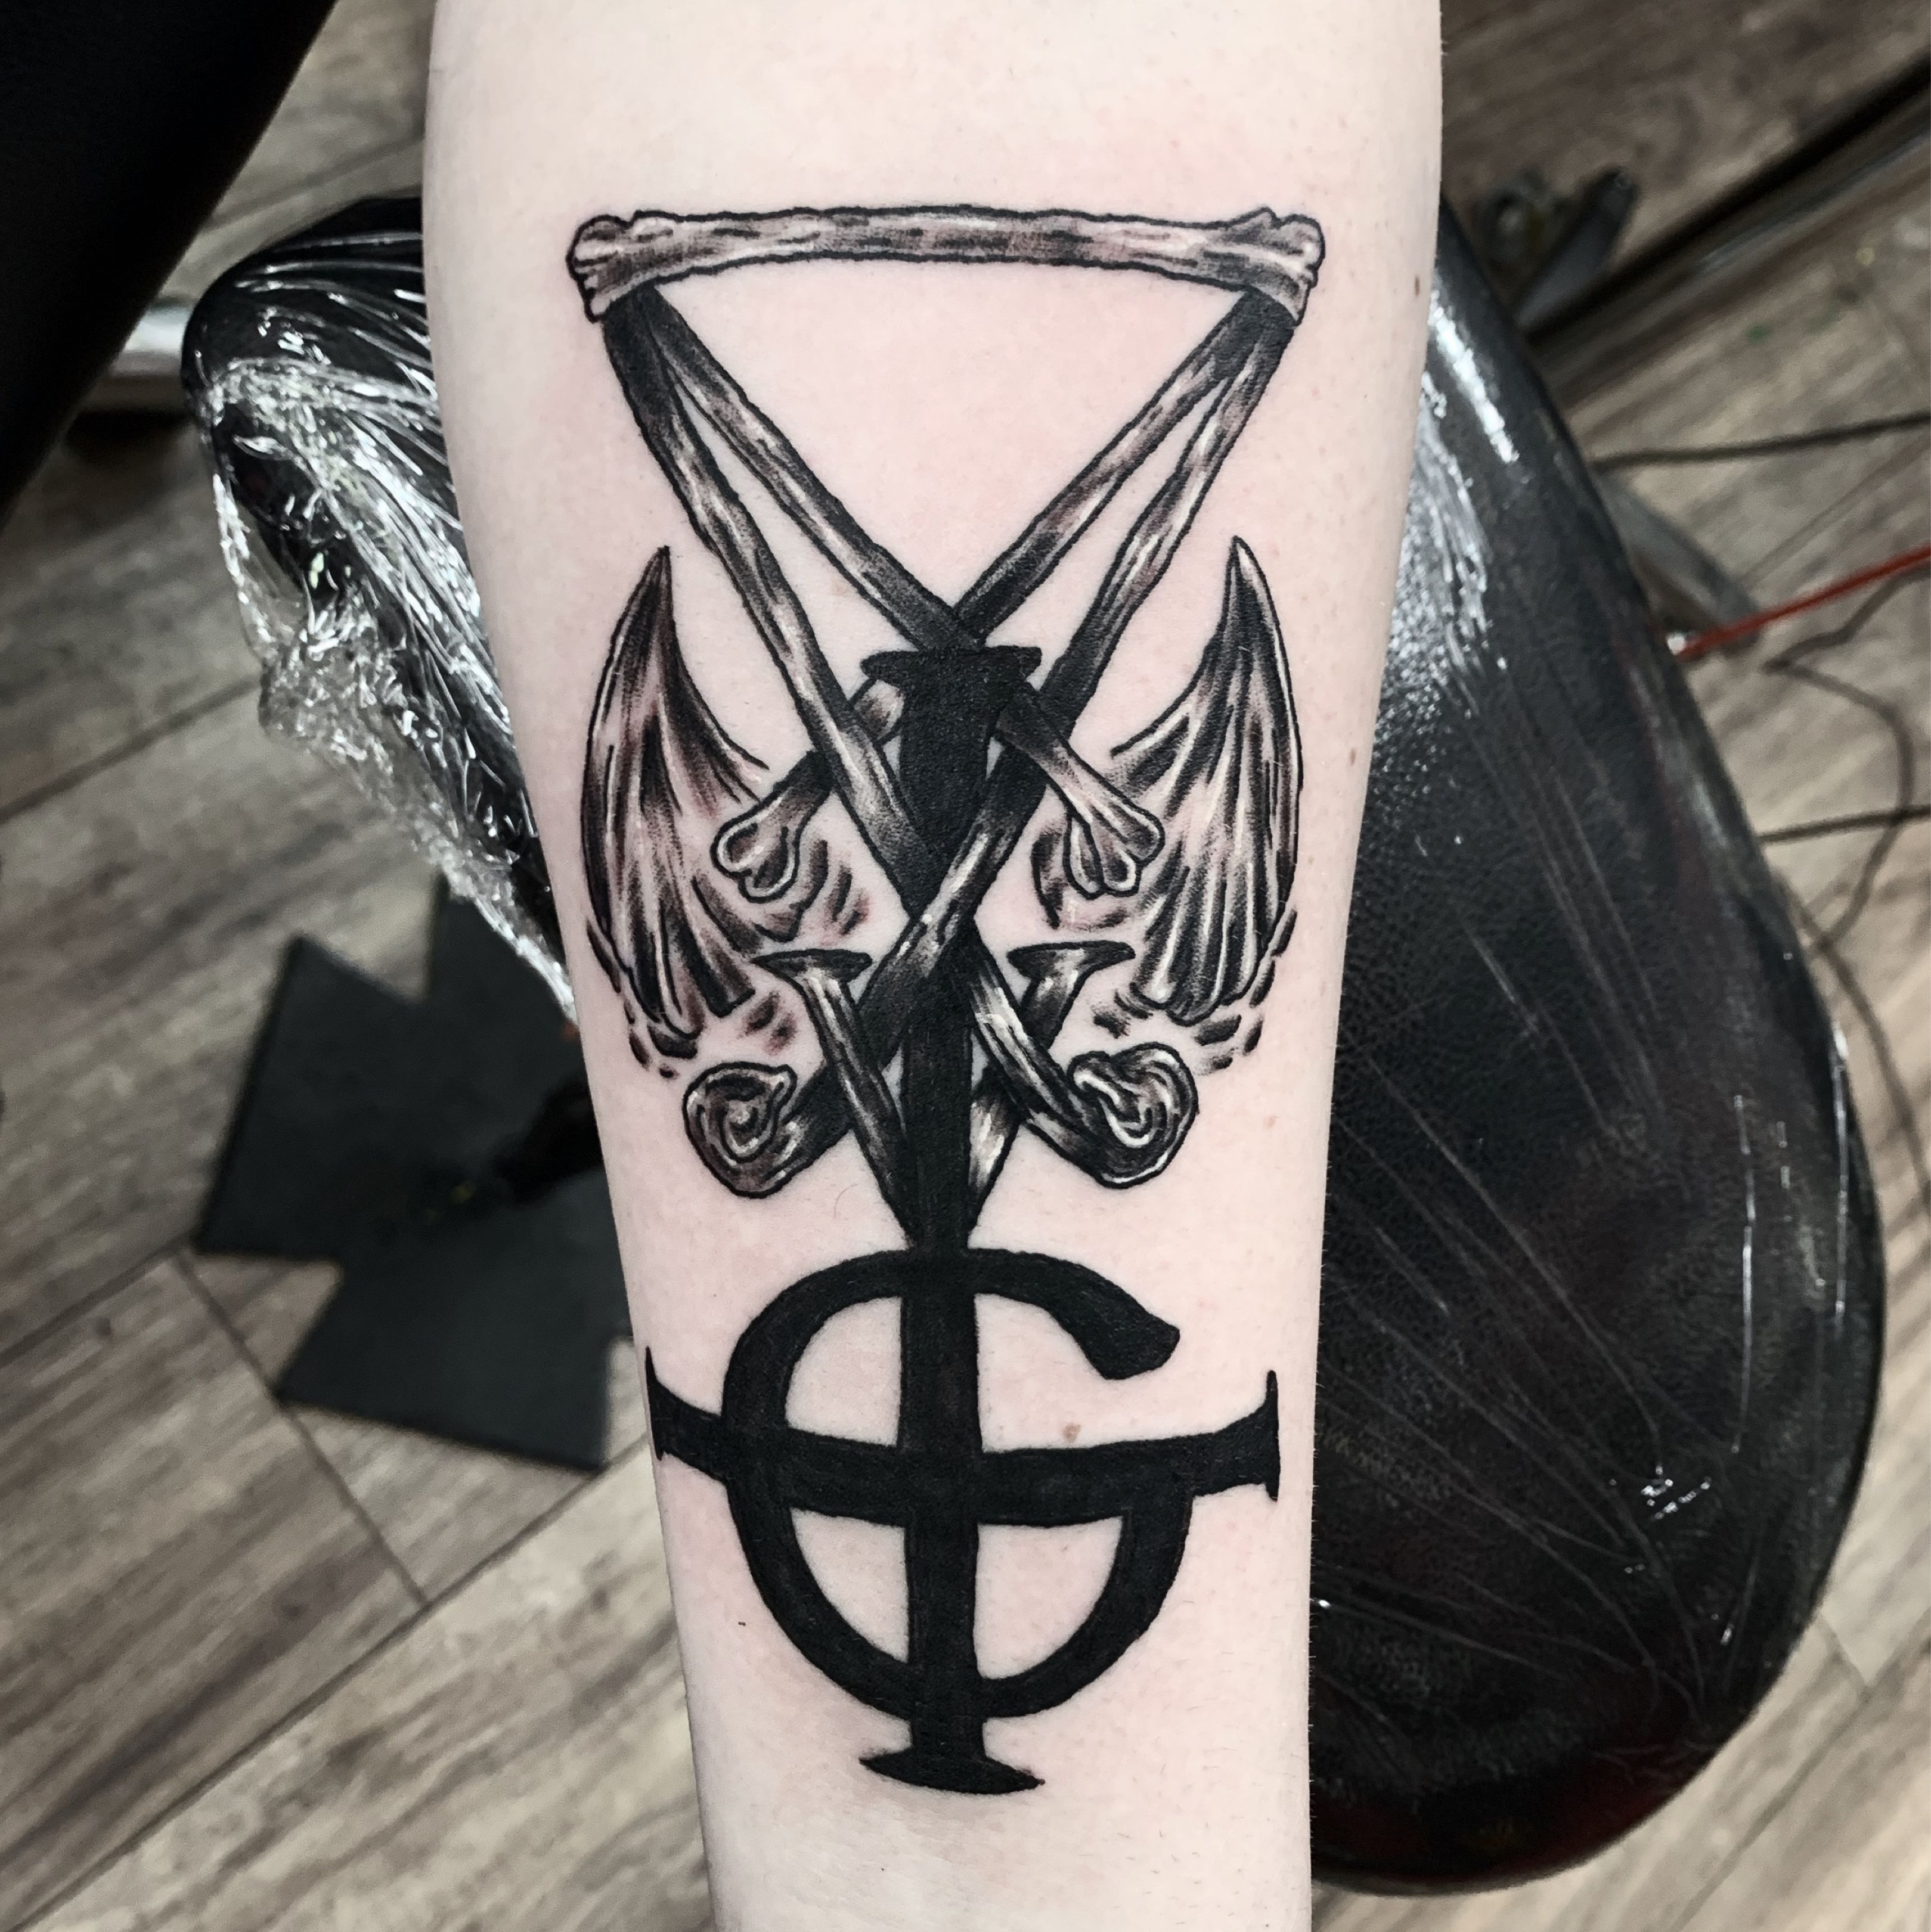 ghost bc tattoo - Google Search | Ghost tattoo, Ghost logo, Band ghost